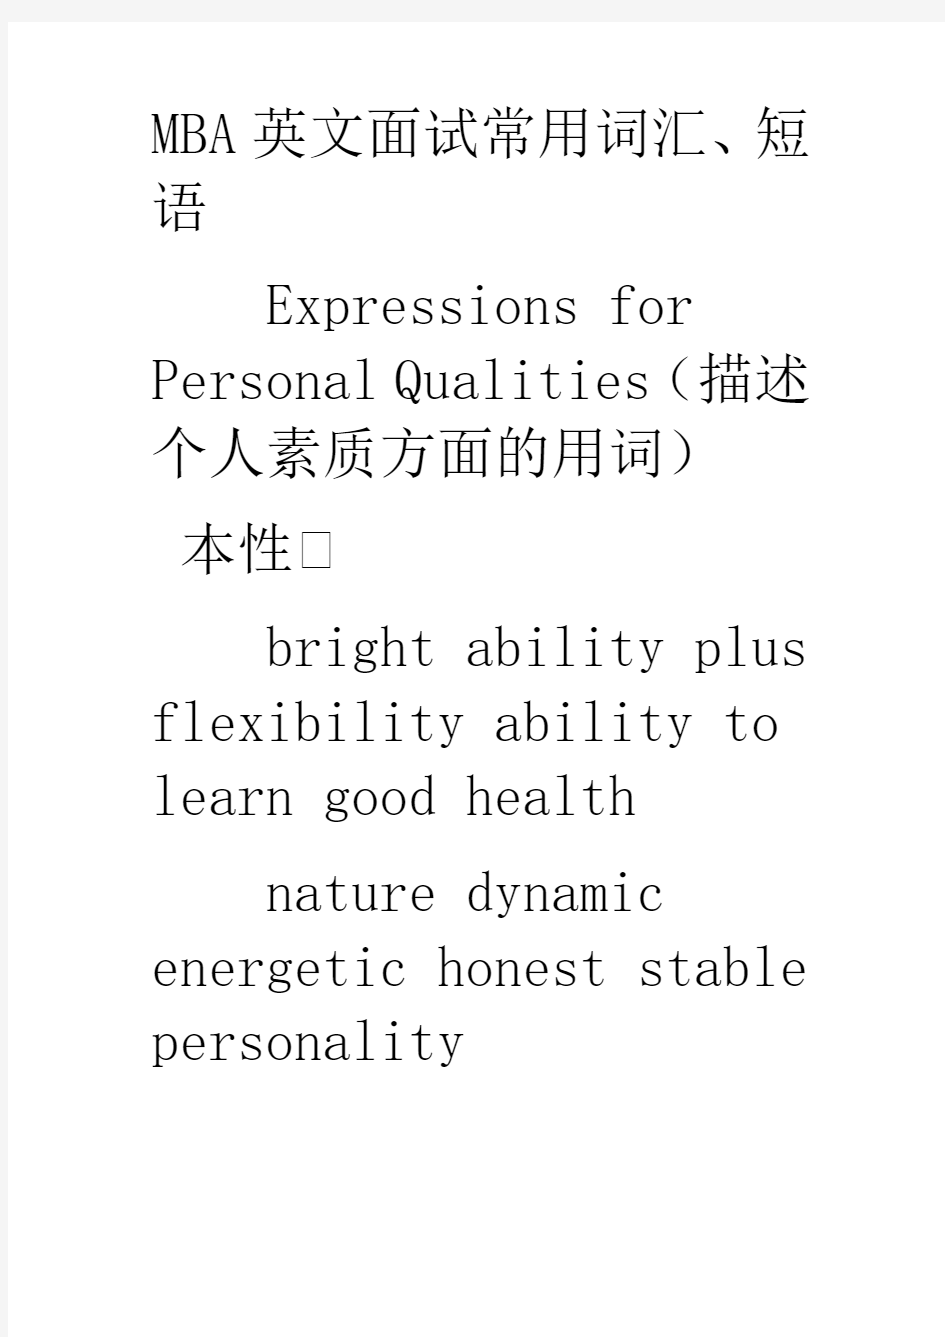 MBA英文面试常用词汇,短语Expressions for Personal Qualities(描述个人素质方面的用词)